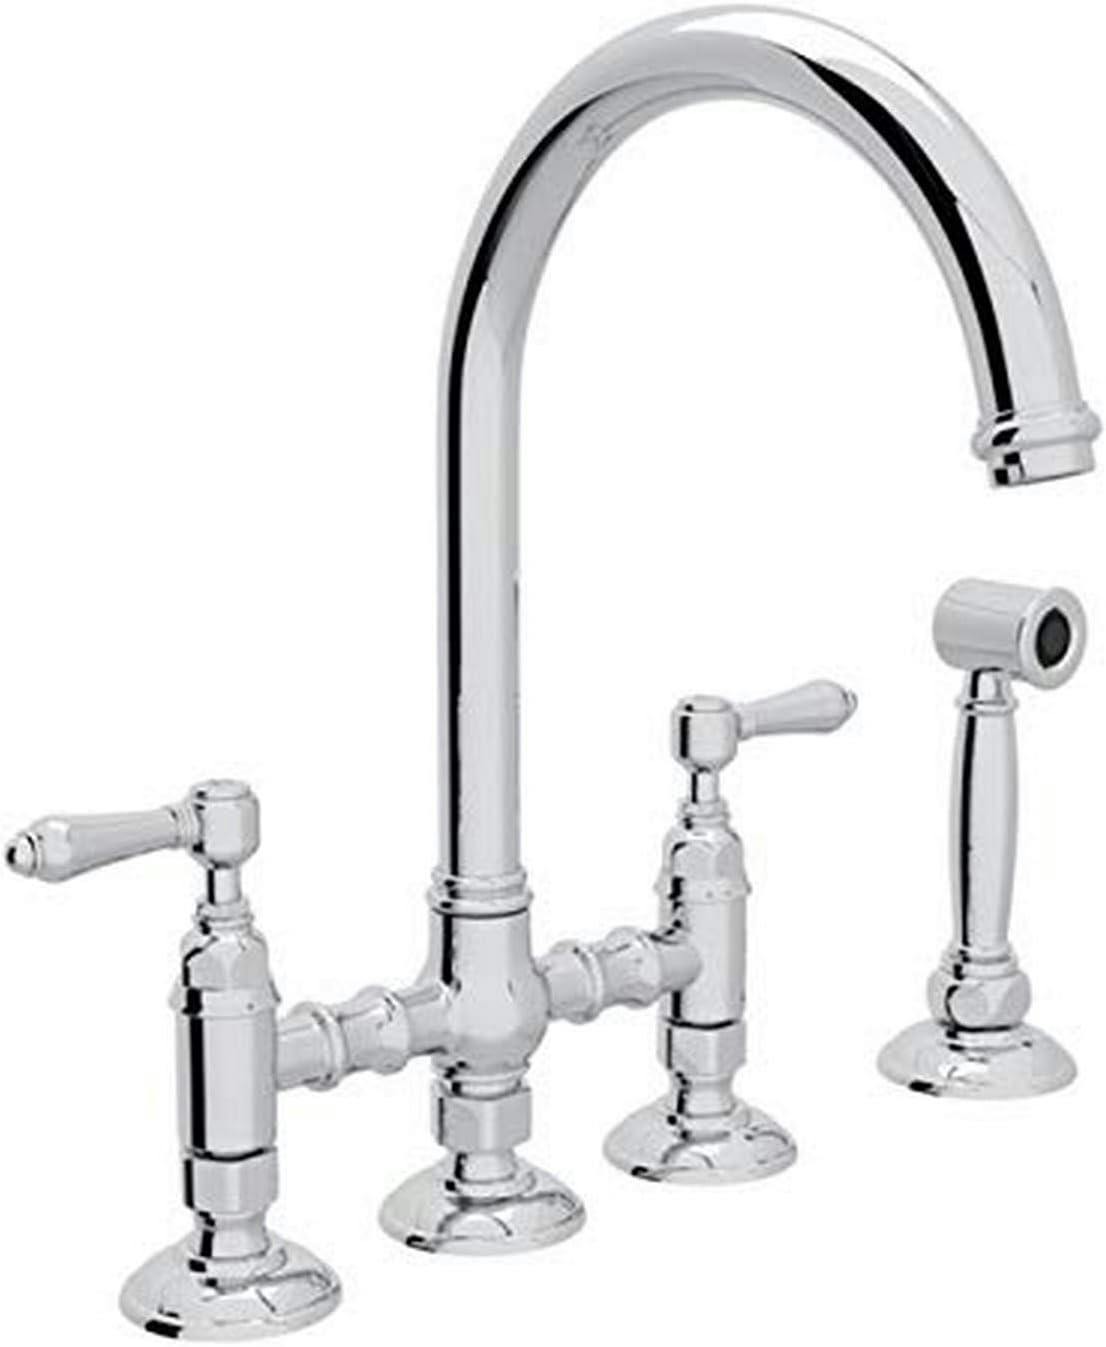 Classic Polished Nickel Kitchen Faucet with Sidespray and Dual Handles